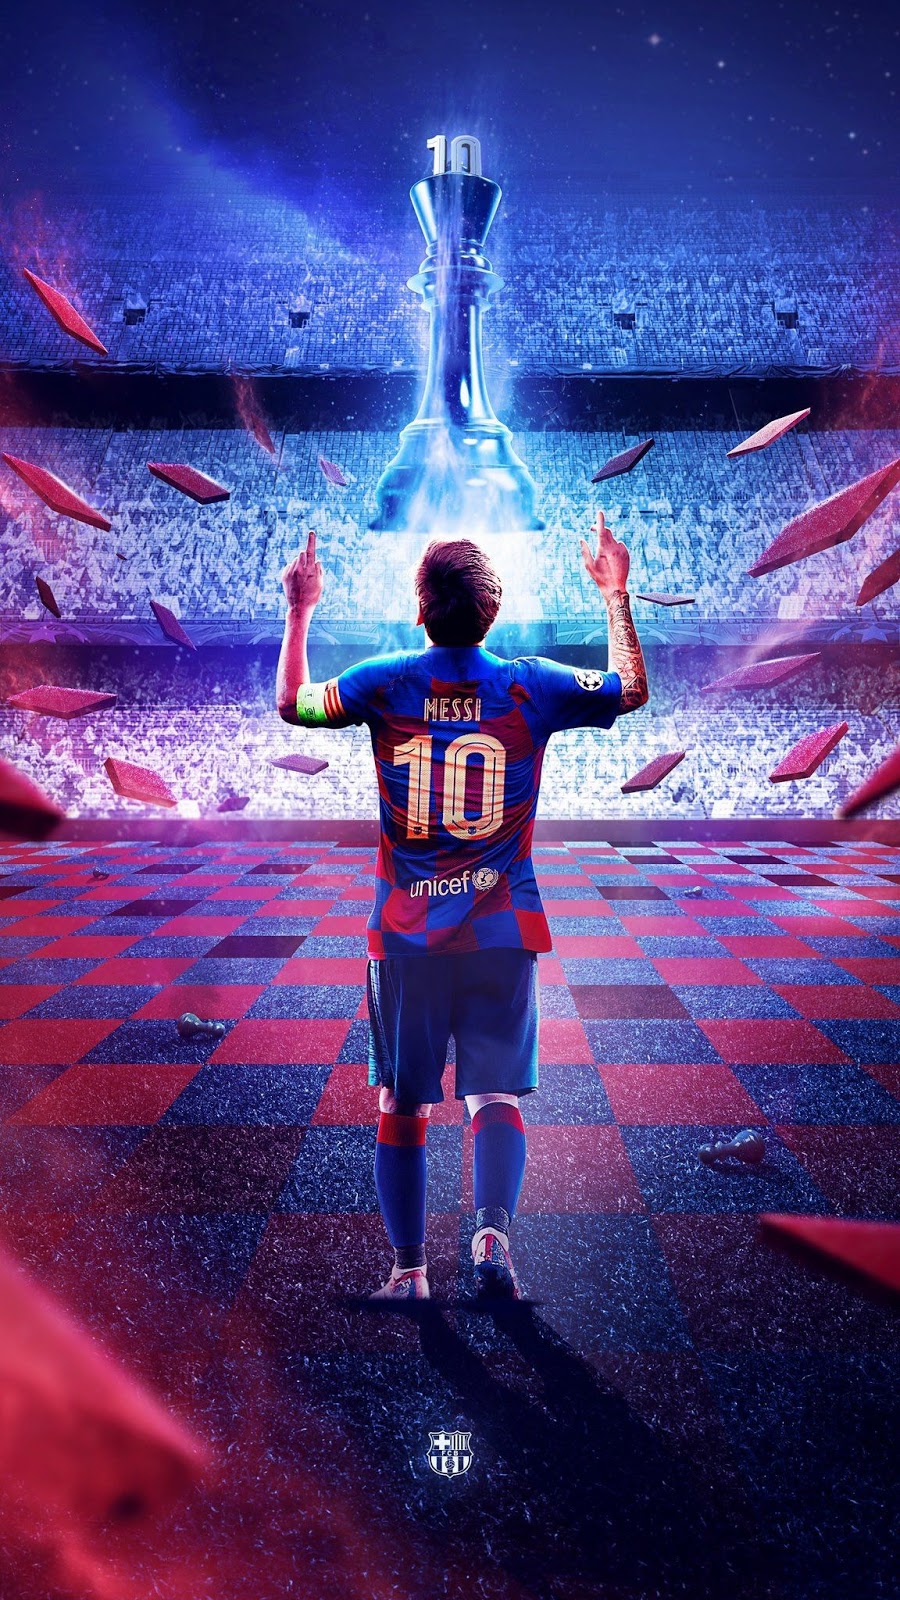 messi wallpaper,football player,competition event,graphic design,football,space